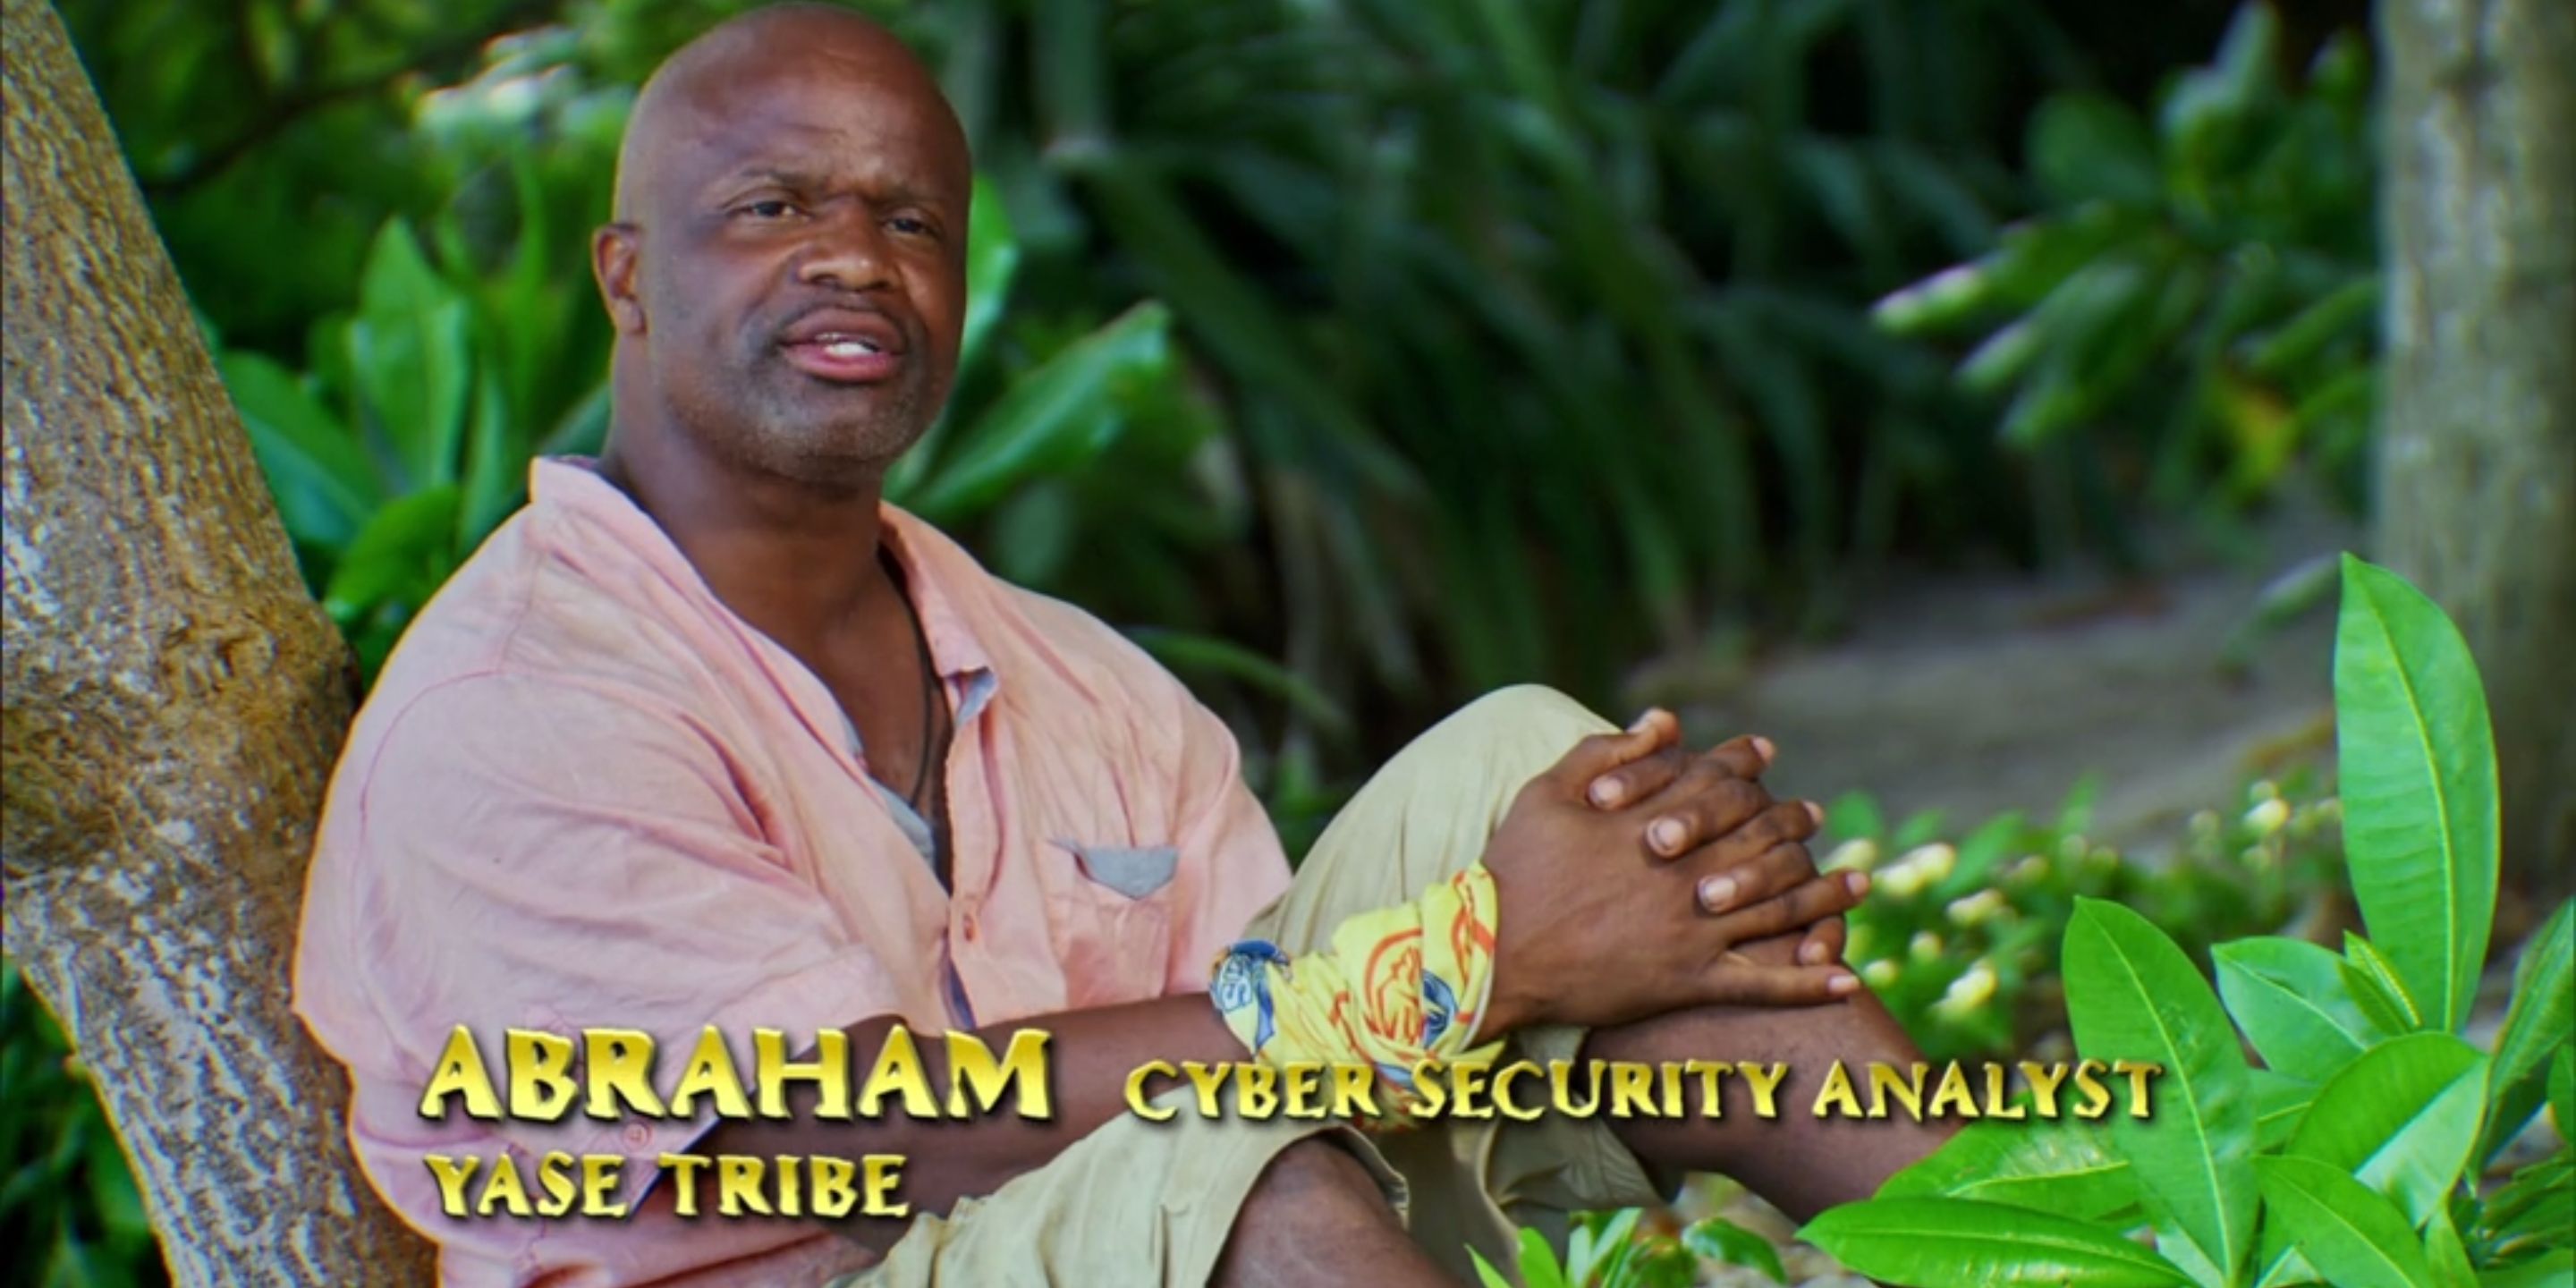 Eric Abraham gives a confessional interview on Survivor 41.